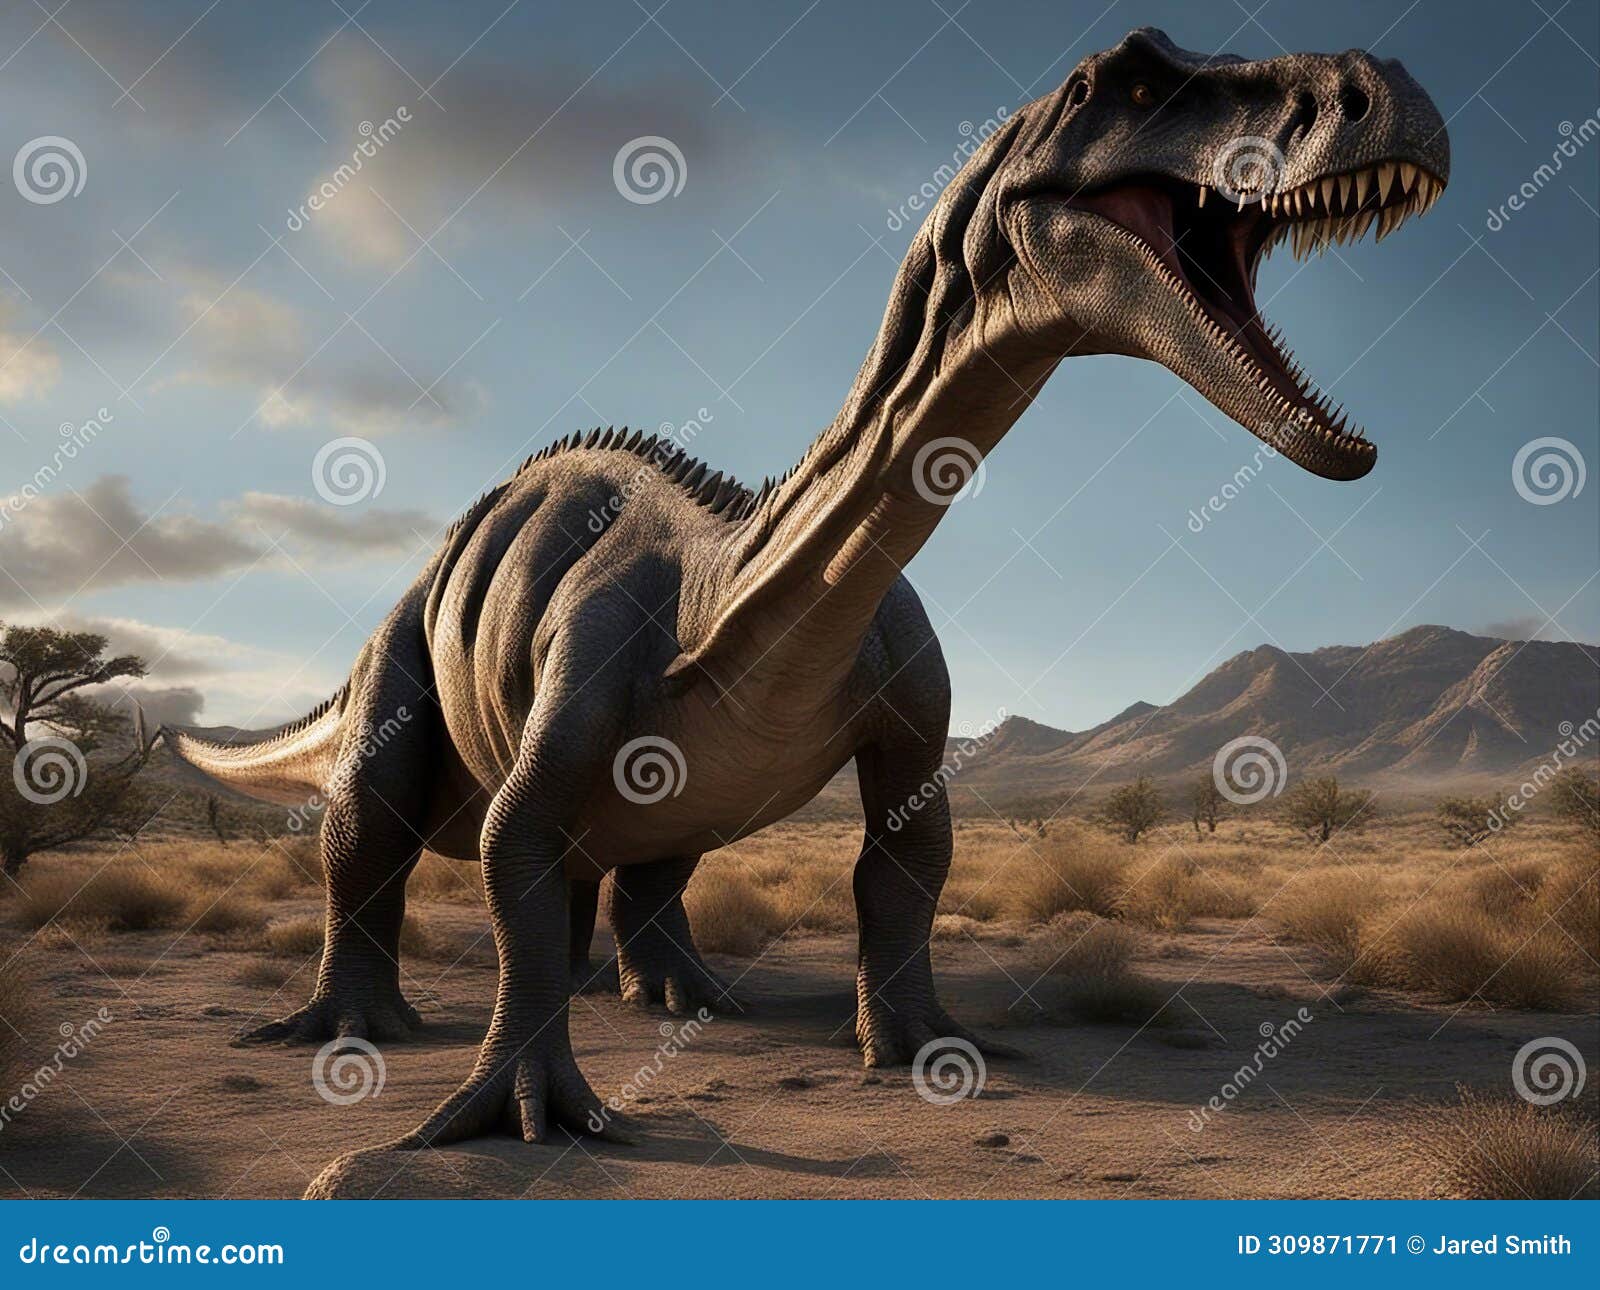 dinosaur in the desert _a sauropod was an exploited creature that existed on the earth in the troubled times,